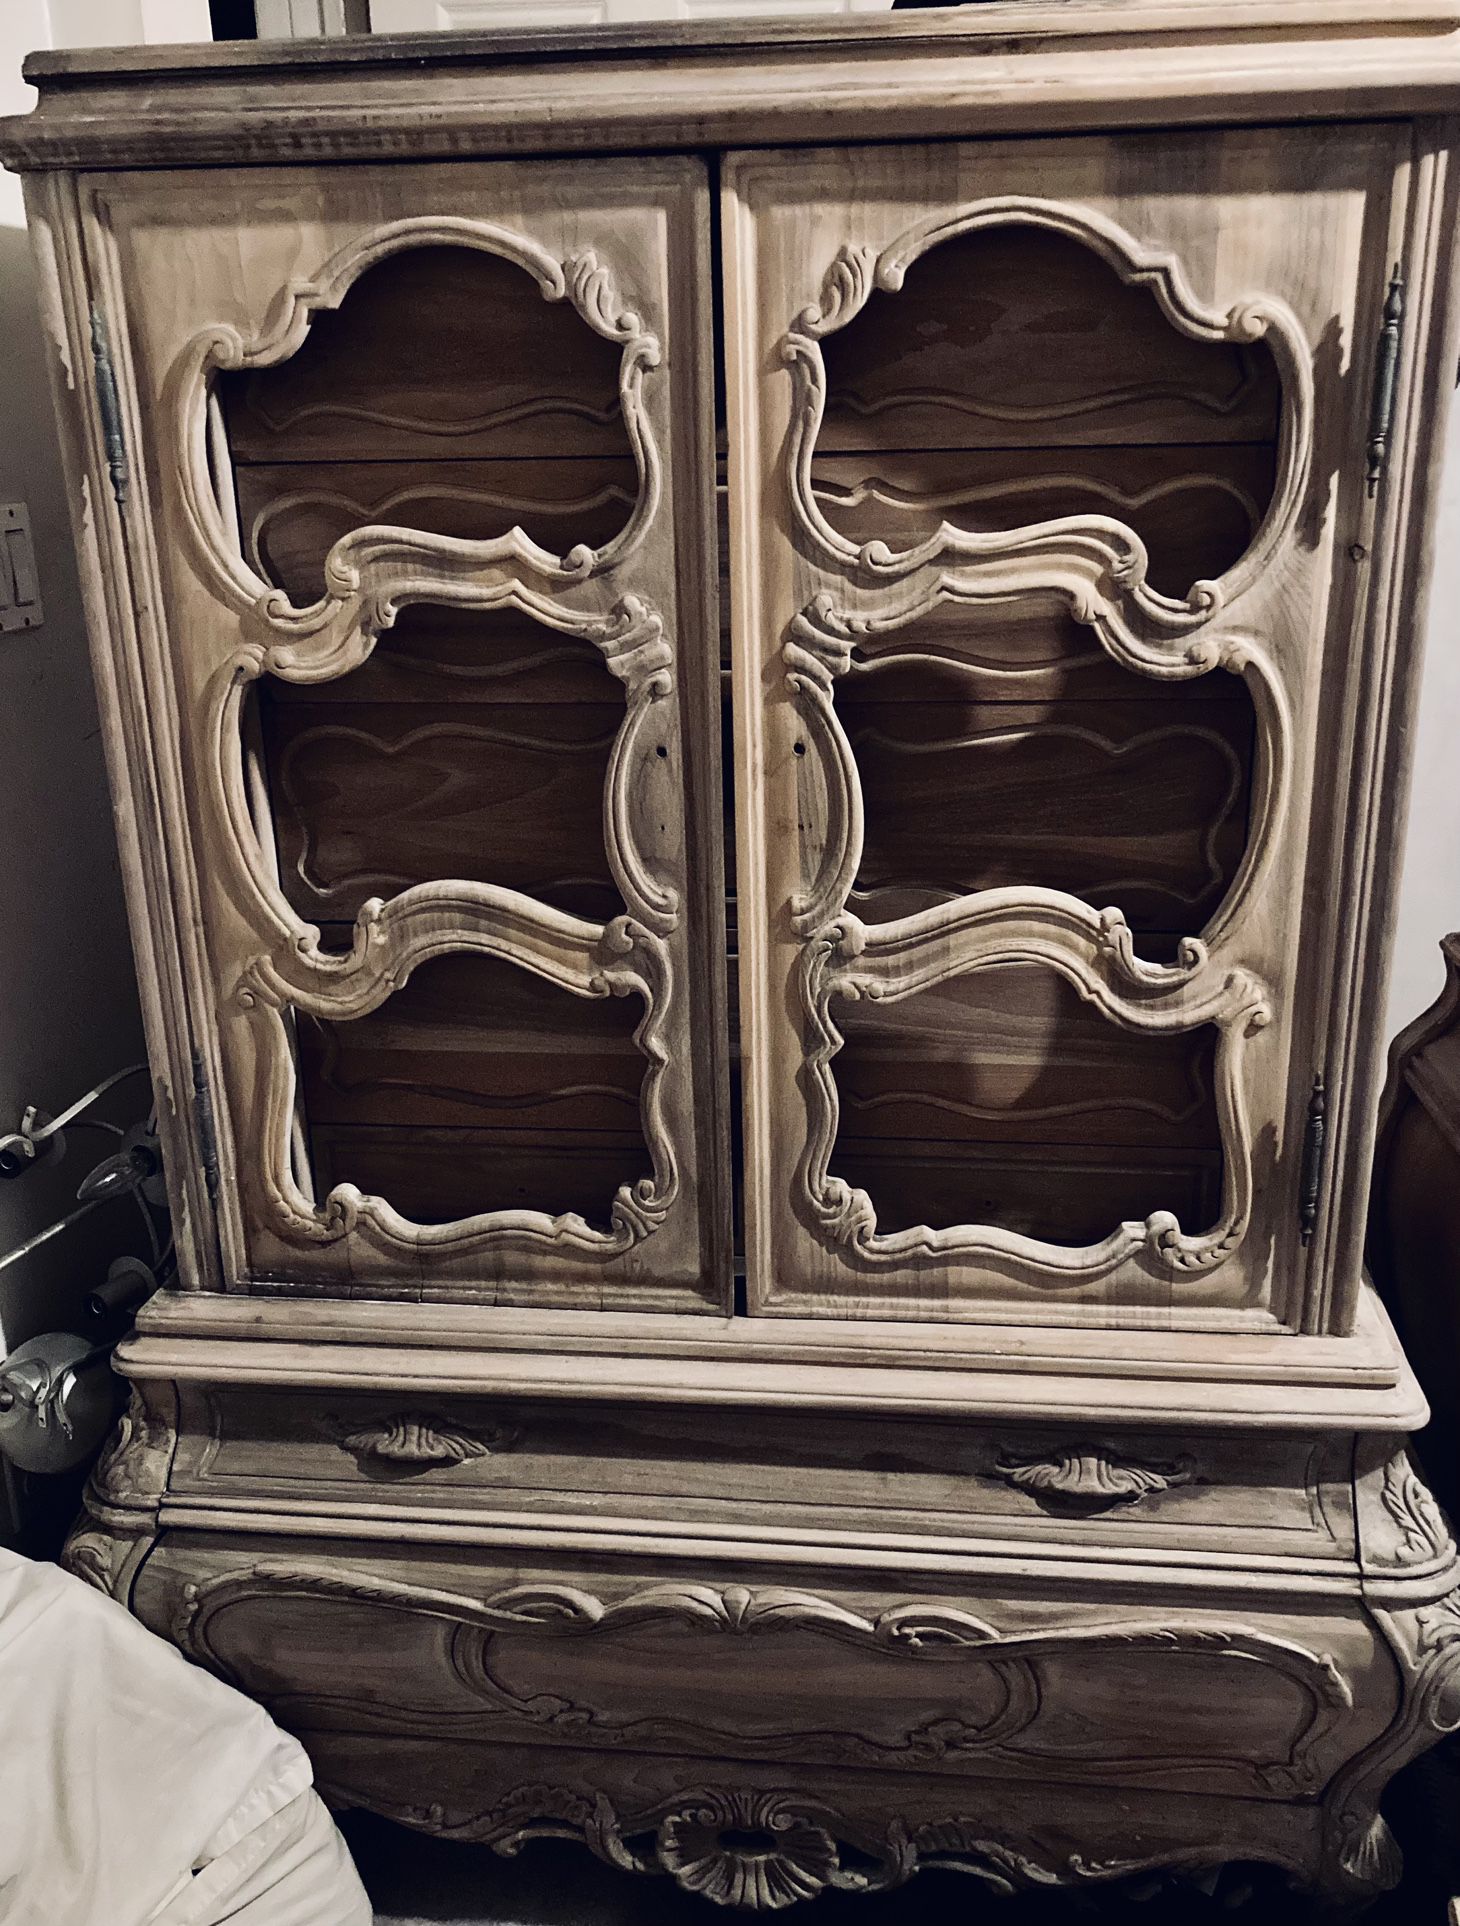 Rare Vintage French Provincial Five Piece Bdrm Set Sanded Down Ready for Paint or Stain